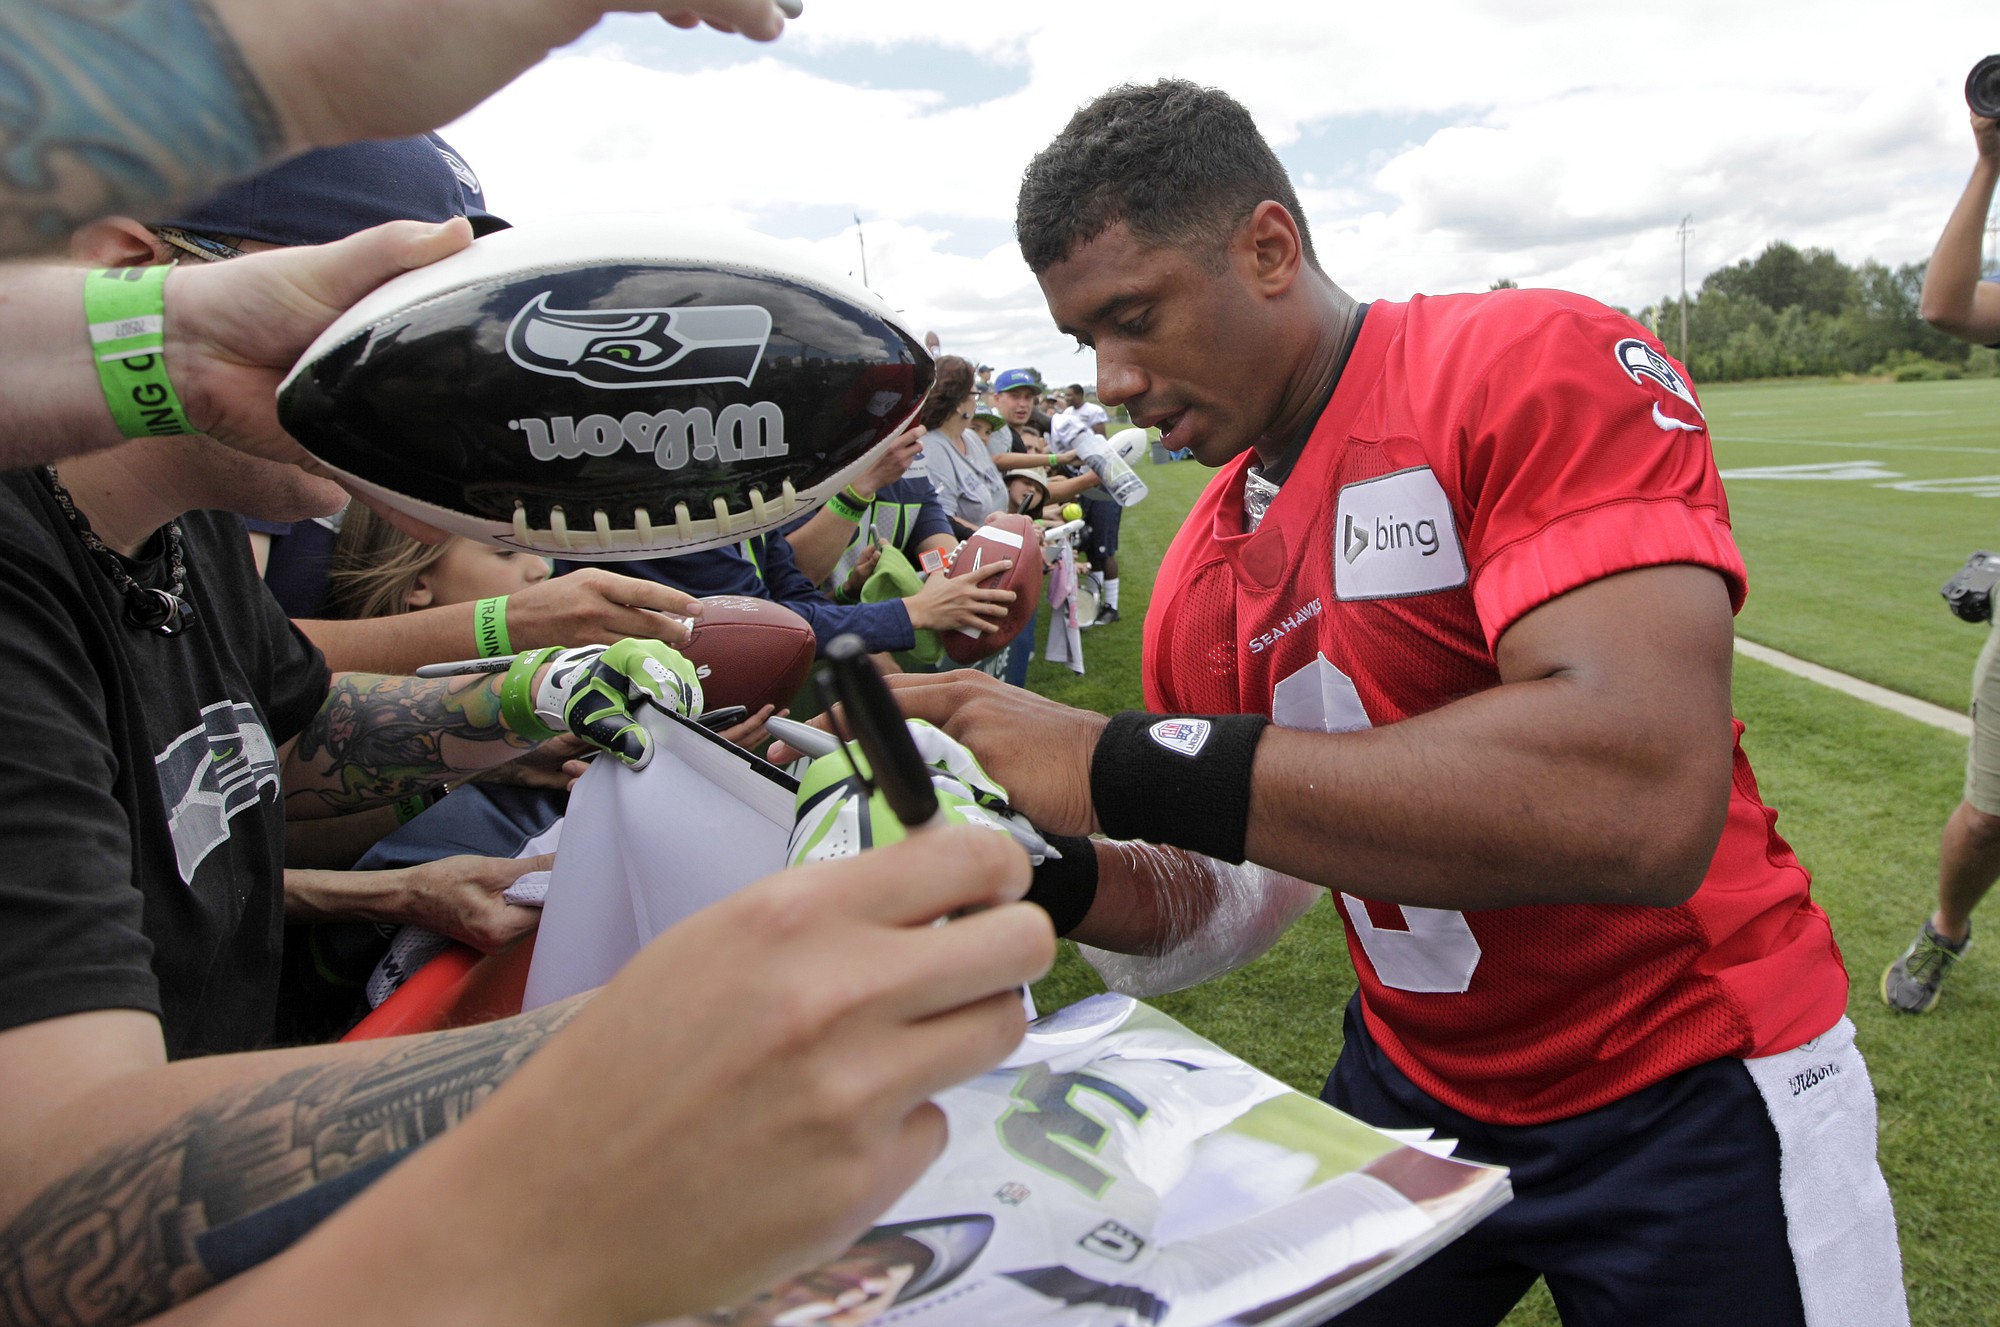 Seattle Seahawks quarterback Russell Wilson signs autographs following an NFL football camp practice Friday, July 25, 2014, in Renton, Wash.